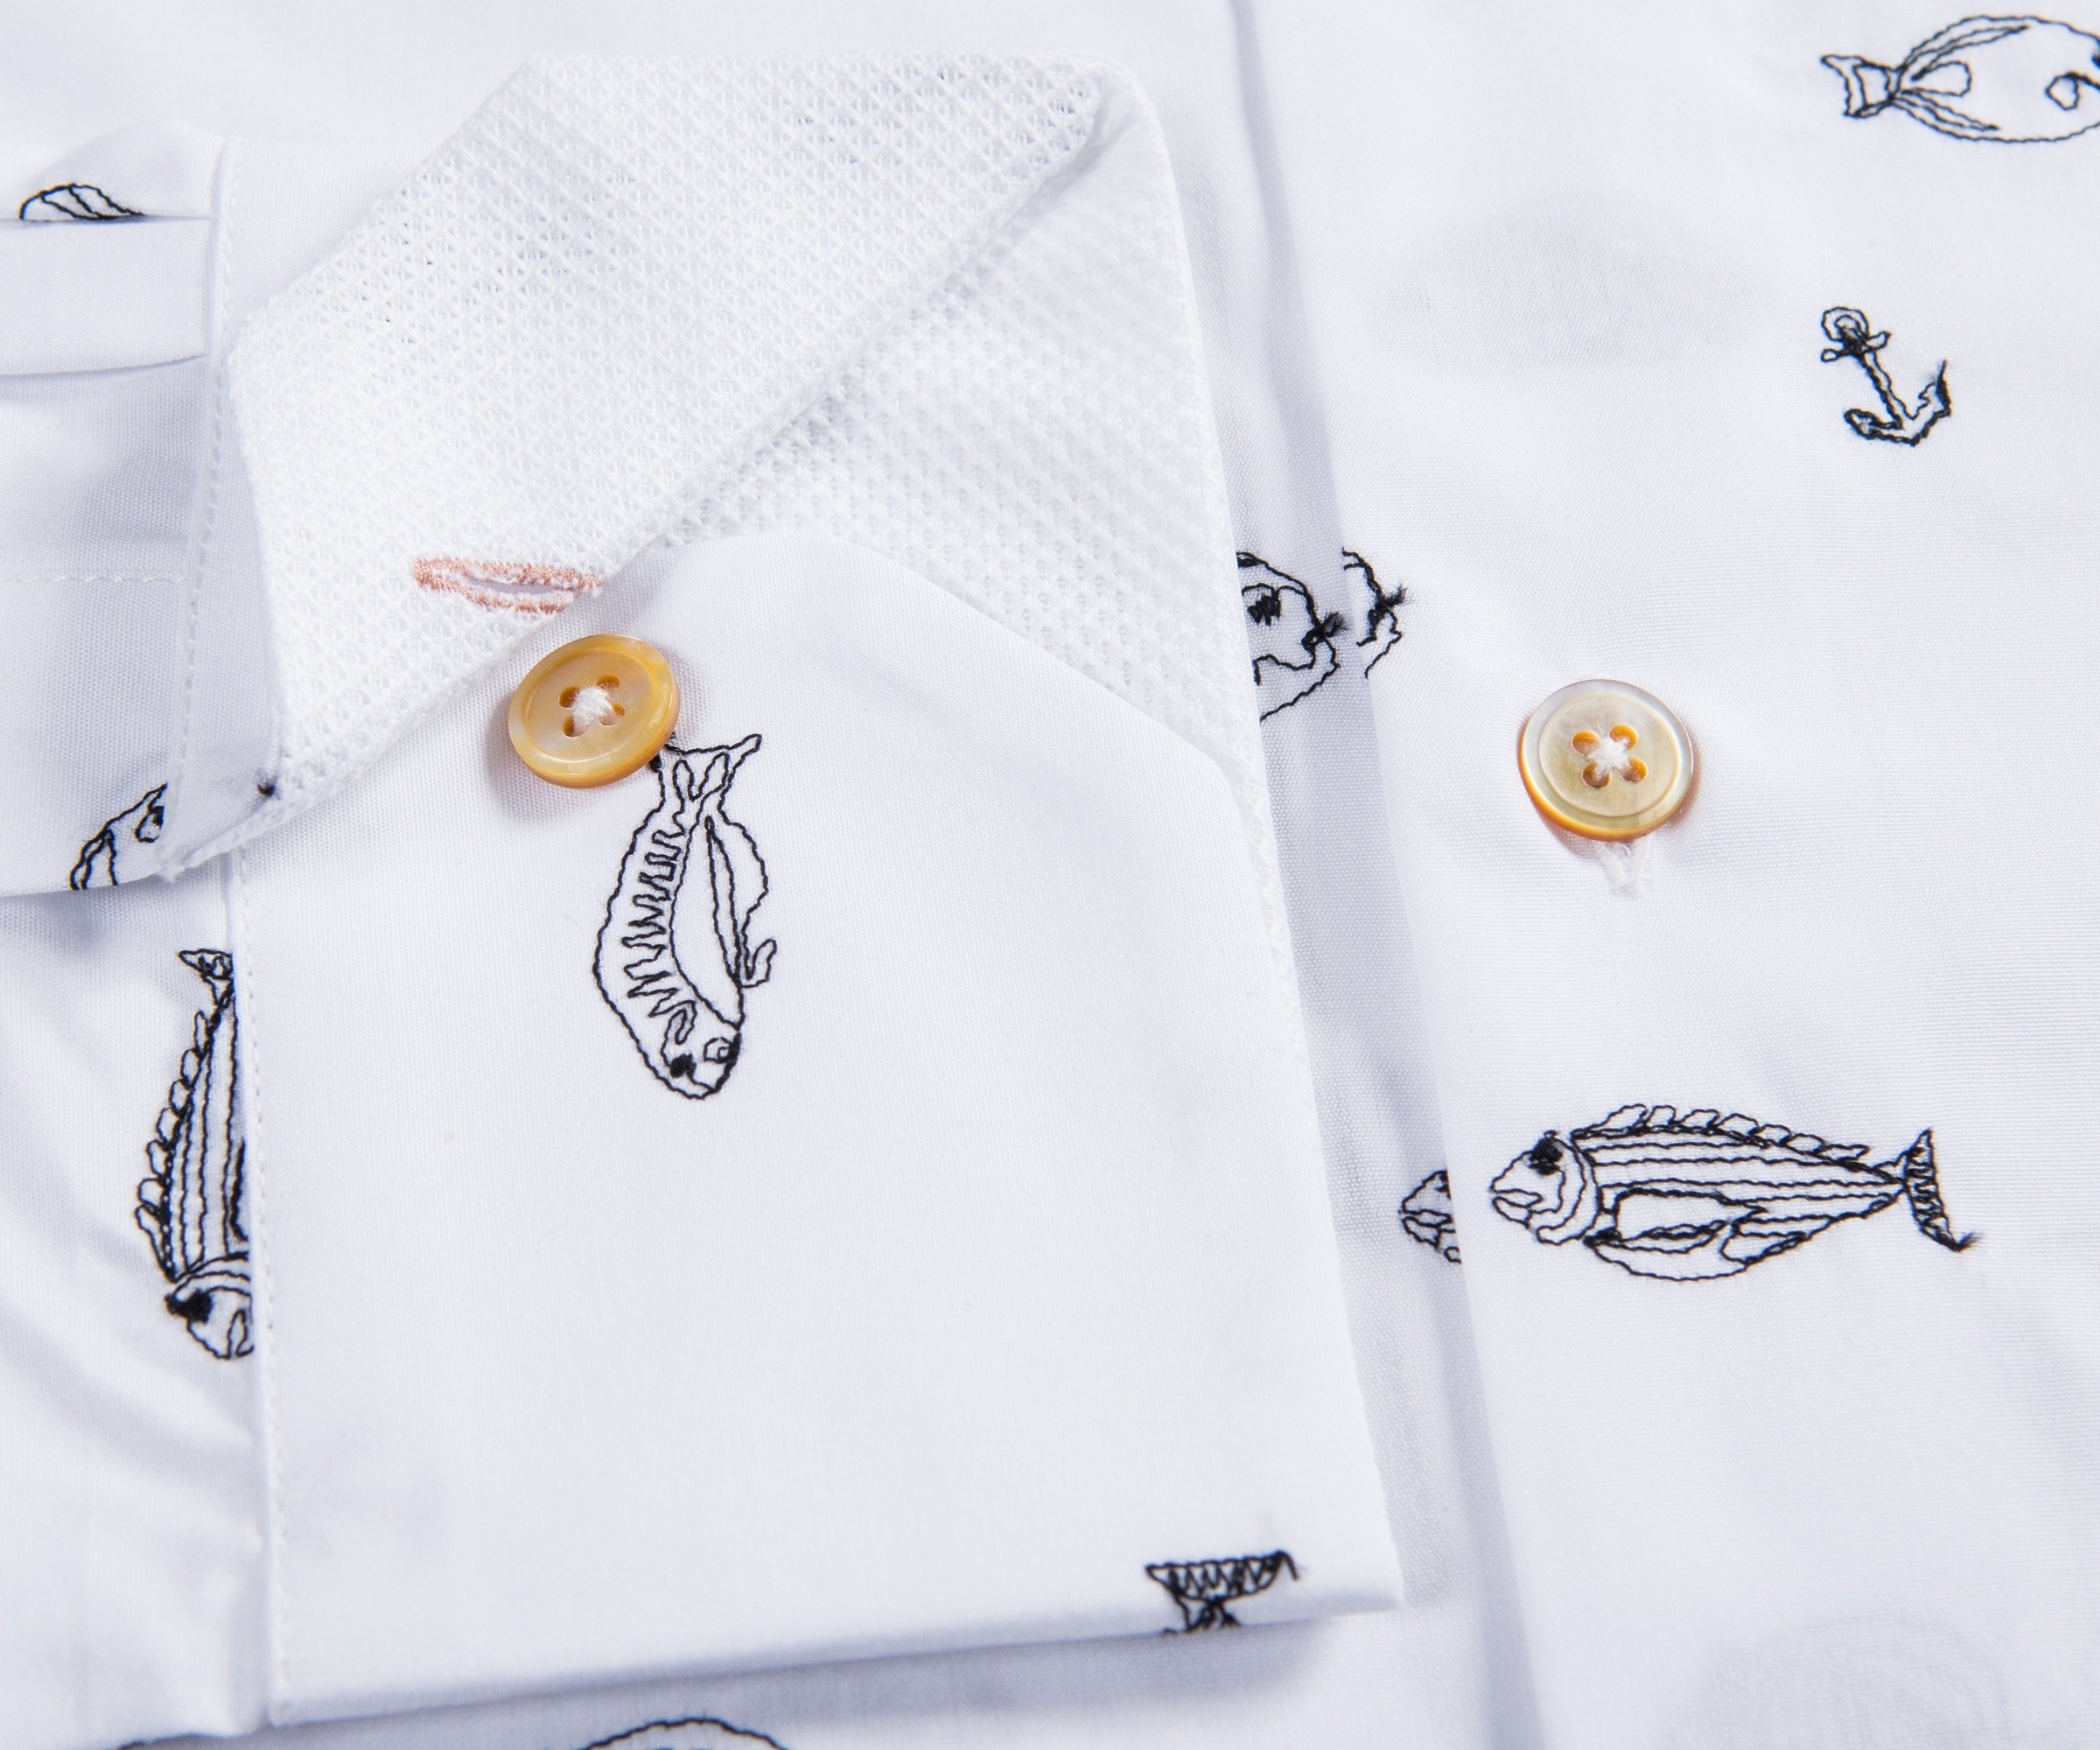 https://www.pockets.co.uk/media/catalog/product/cache/afca9a4301a4f957e27126911791b579/e/m/embroidered-fish-shirt-with-lined-cuff-white-3.jpg